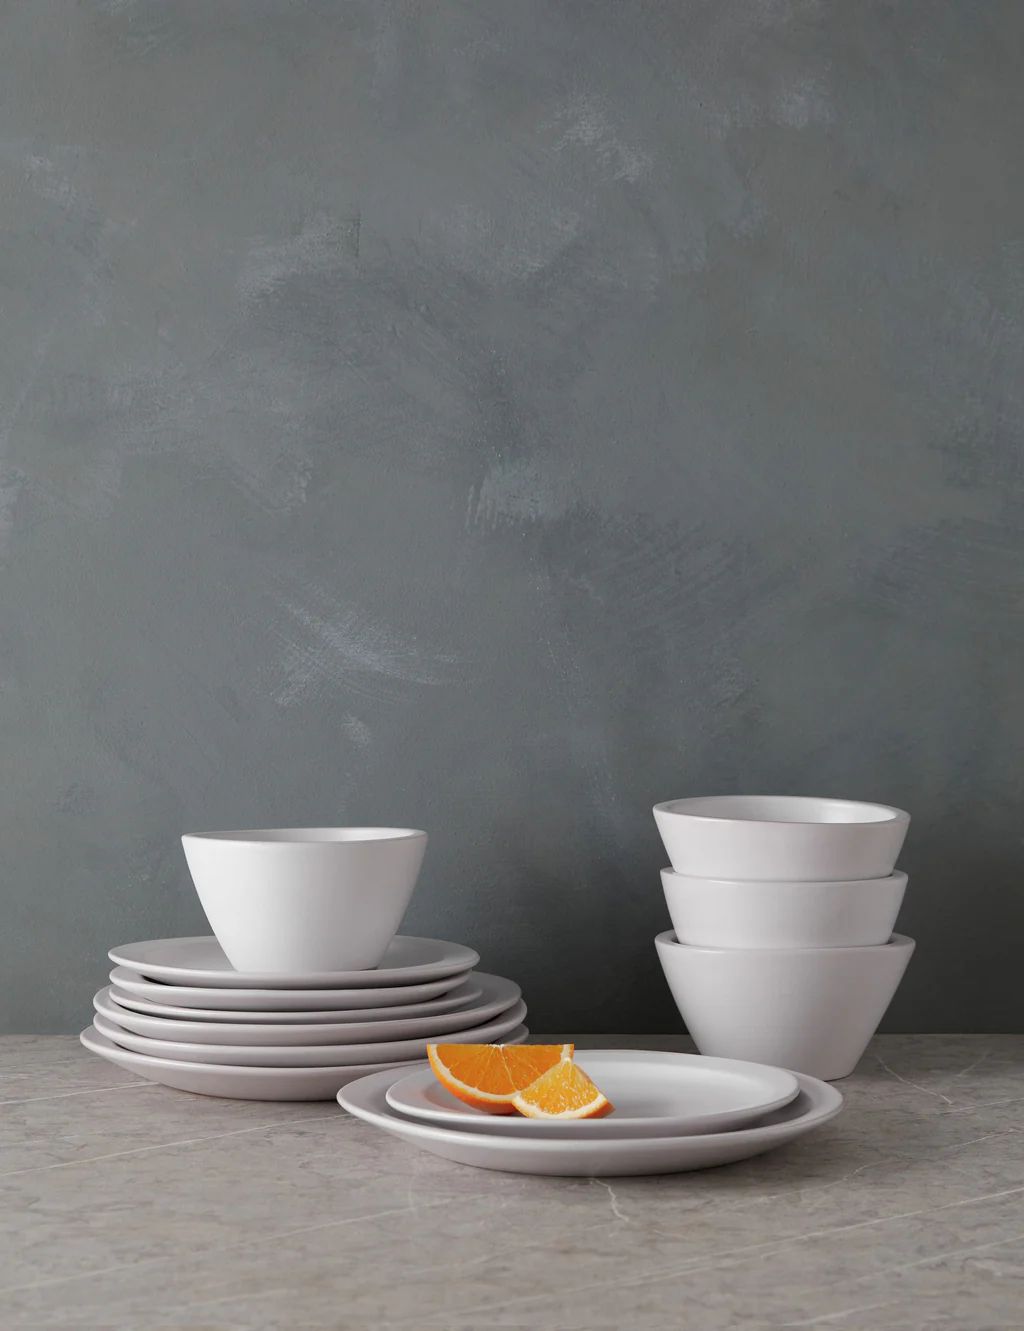 Aluna Dinnerware Collection (12-piece set) by Eny Lee Parker | Lulu and Georgia 